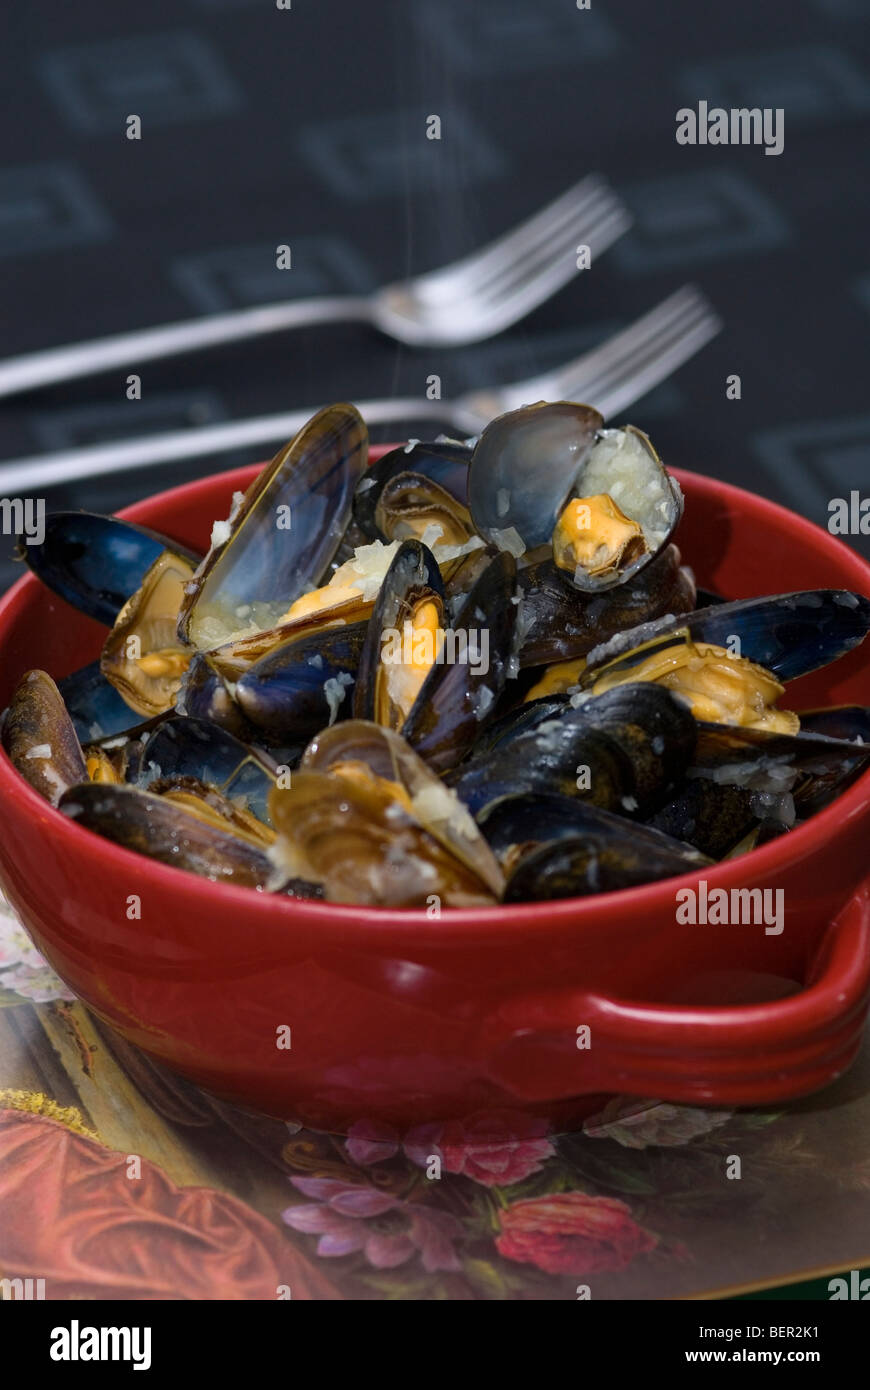 Cooked Mussels in red bowl Stock Photo